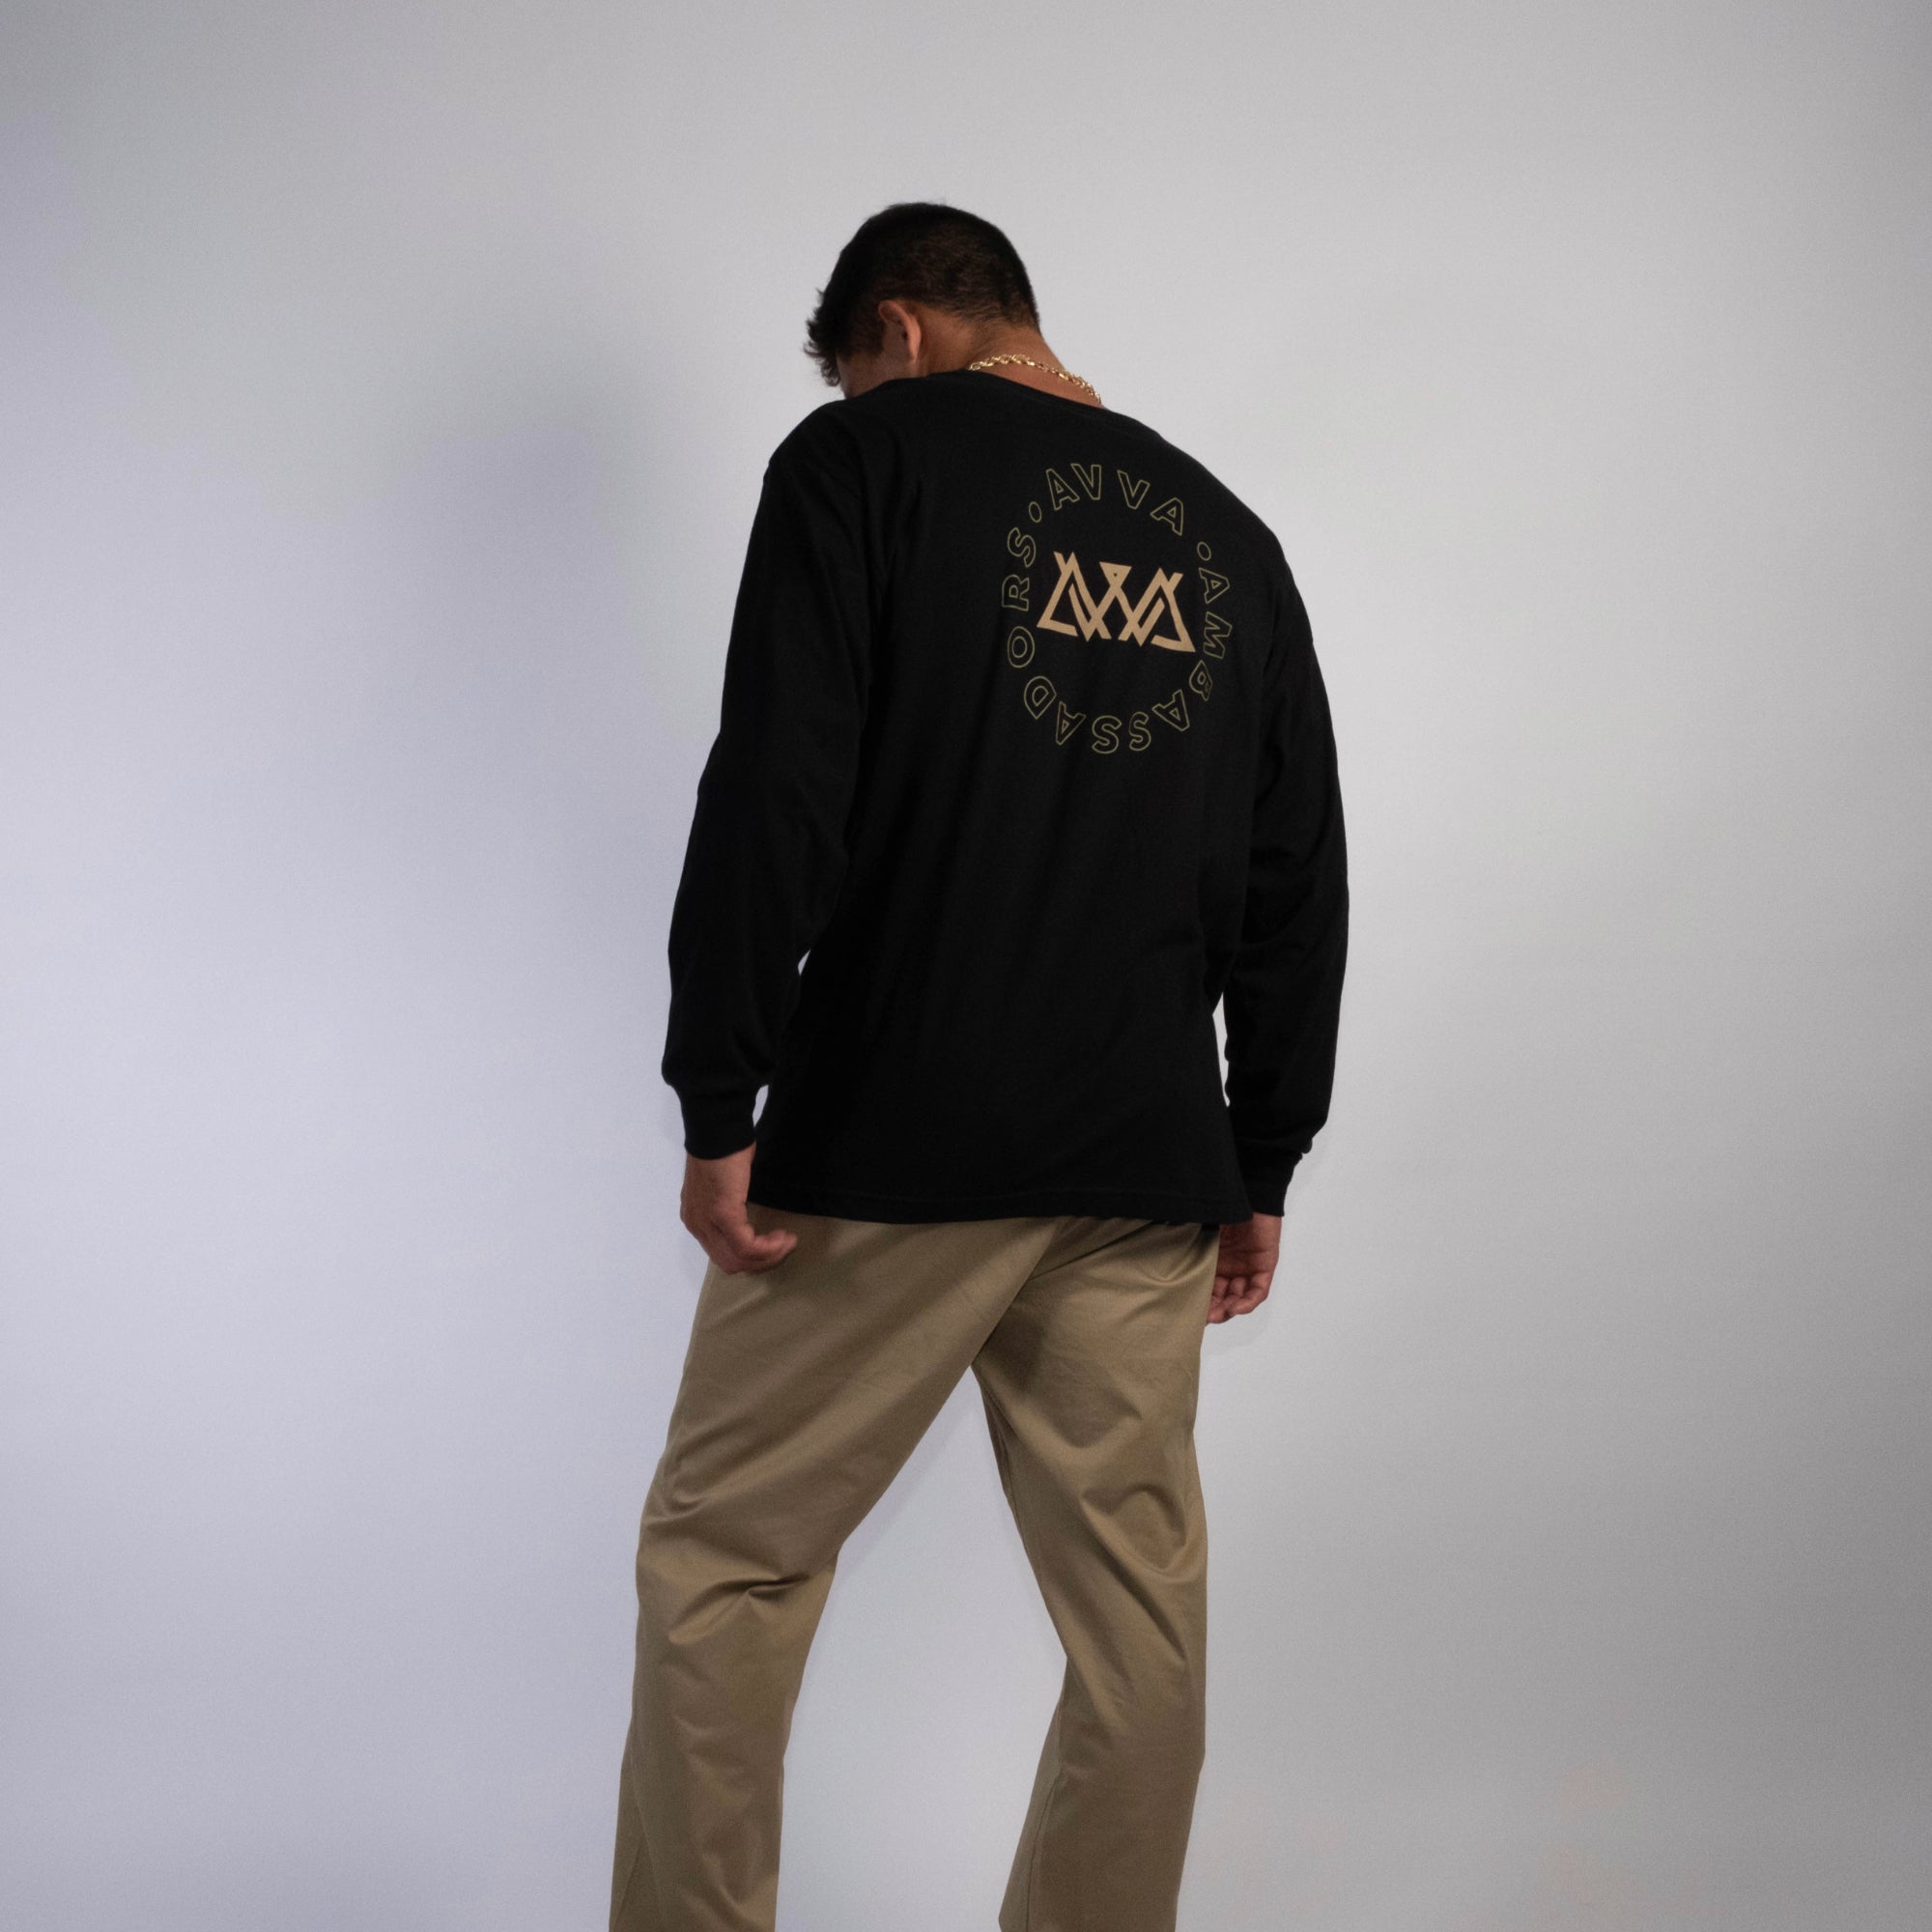 BACK VIEW OF WATERSHED LONGSLEEVE. SHOWS BACK LARGE LOGO WITH AVVA LOGO IN THE MIDDLE AND AVVA AMBASSADORS WRAPPING AROUND THE LOGO AS THE DESIGN. MODEL CASUALLY WEARING THE LONGSLEEVE LOOKING FORWARD.